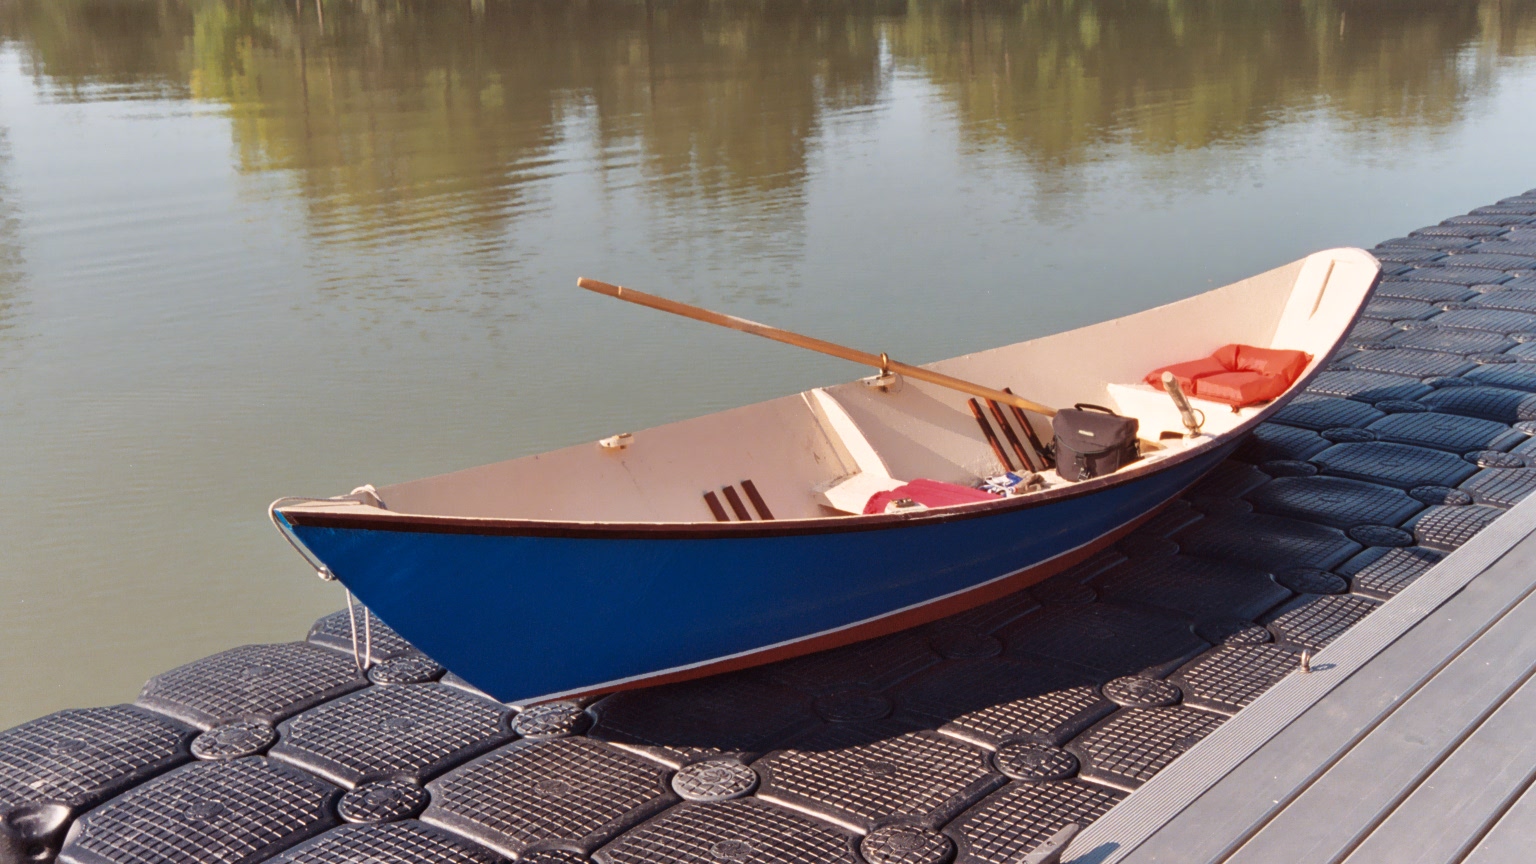  Bolger’s most frequently built boat, the Gloucester Light Dory is